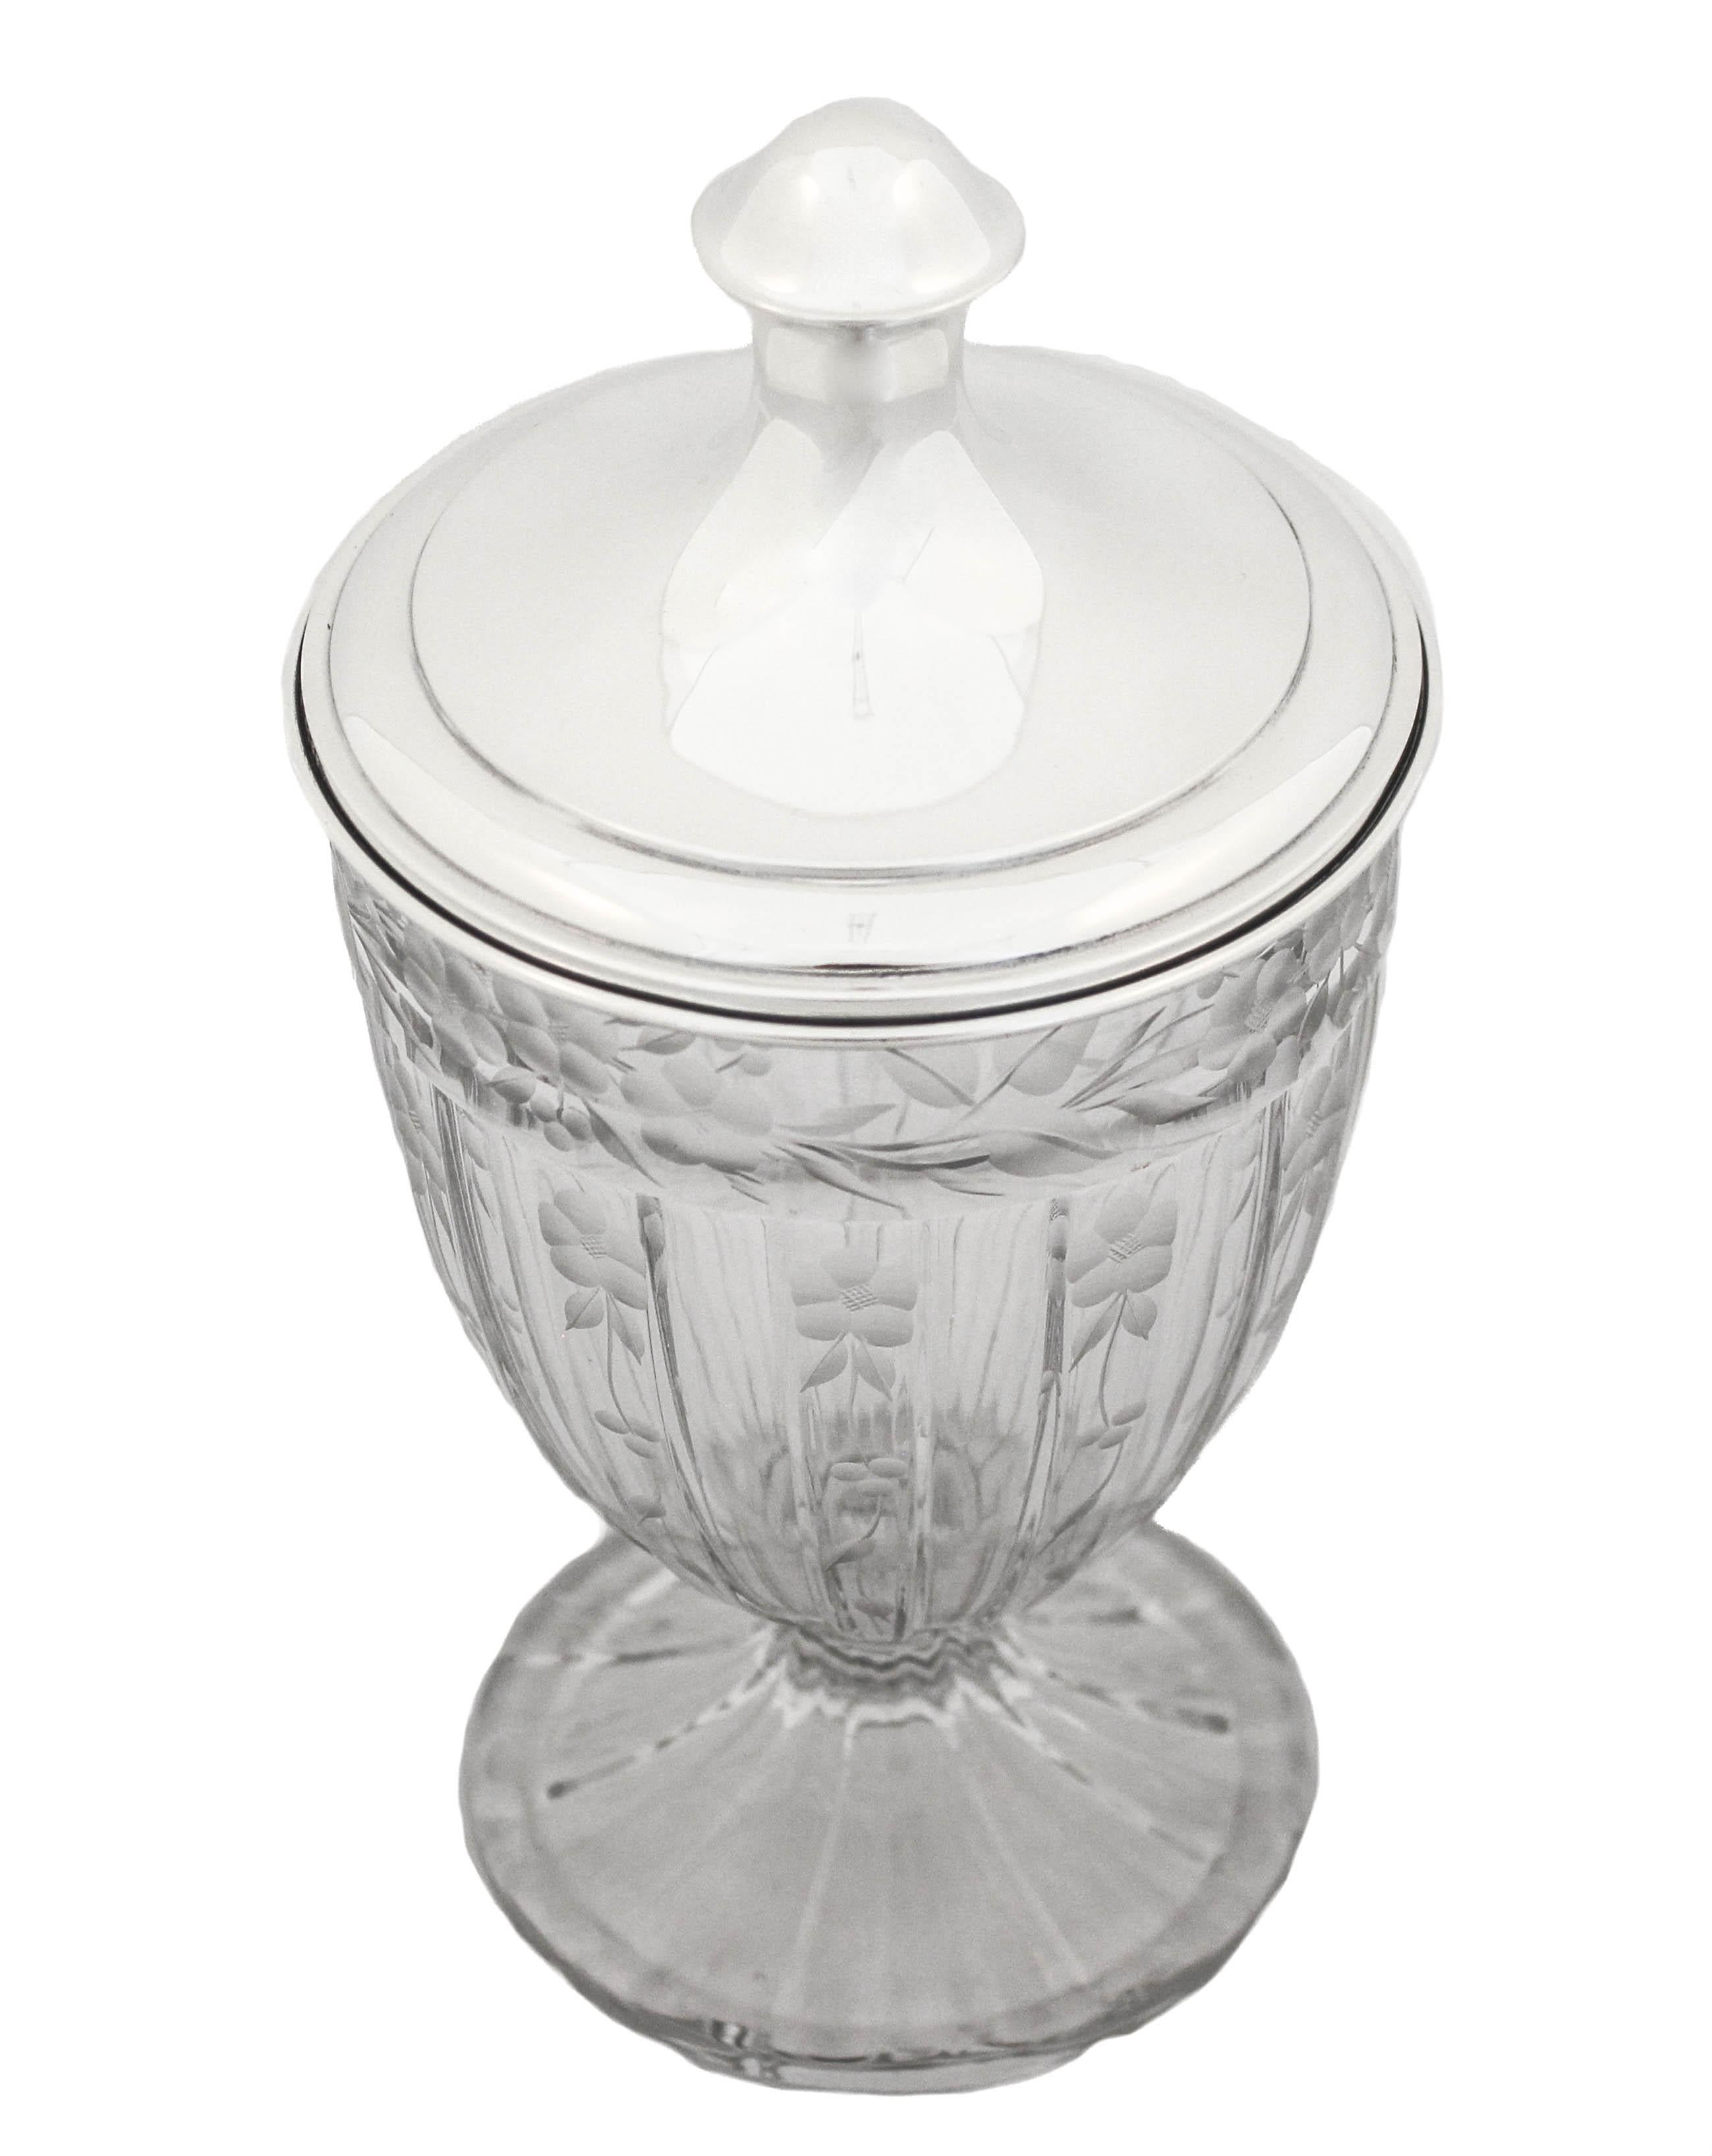 This beautiful crystal urn with a sterling silver lid manufactured by the Hawkes Glass Company. 
Based in Corning, NY, T.G. Hawkes & Co. (c.1880-1959) was established by Thomas Gibbons Hawkes (1846-1913). Born in Ireland, Hawkes immigrated to